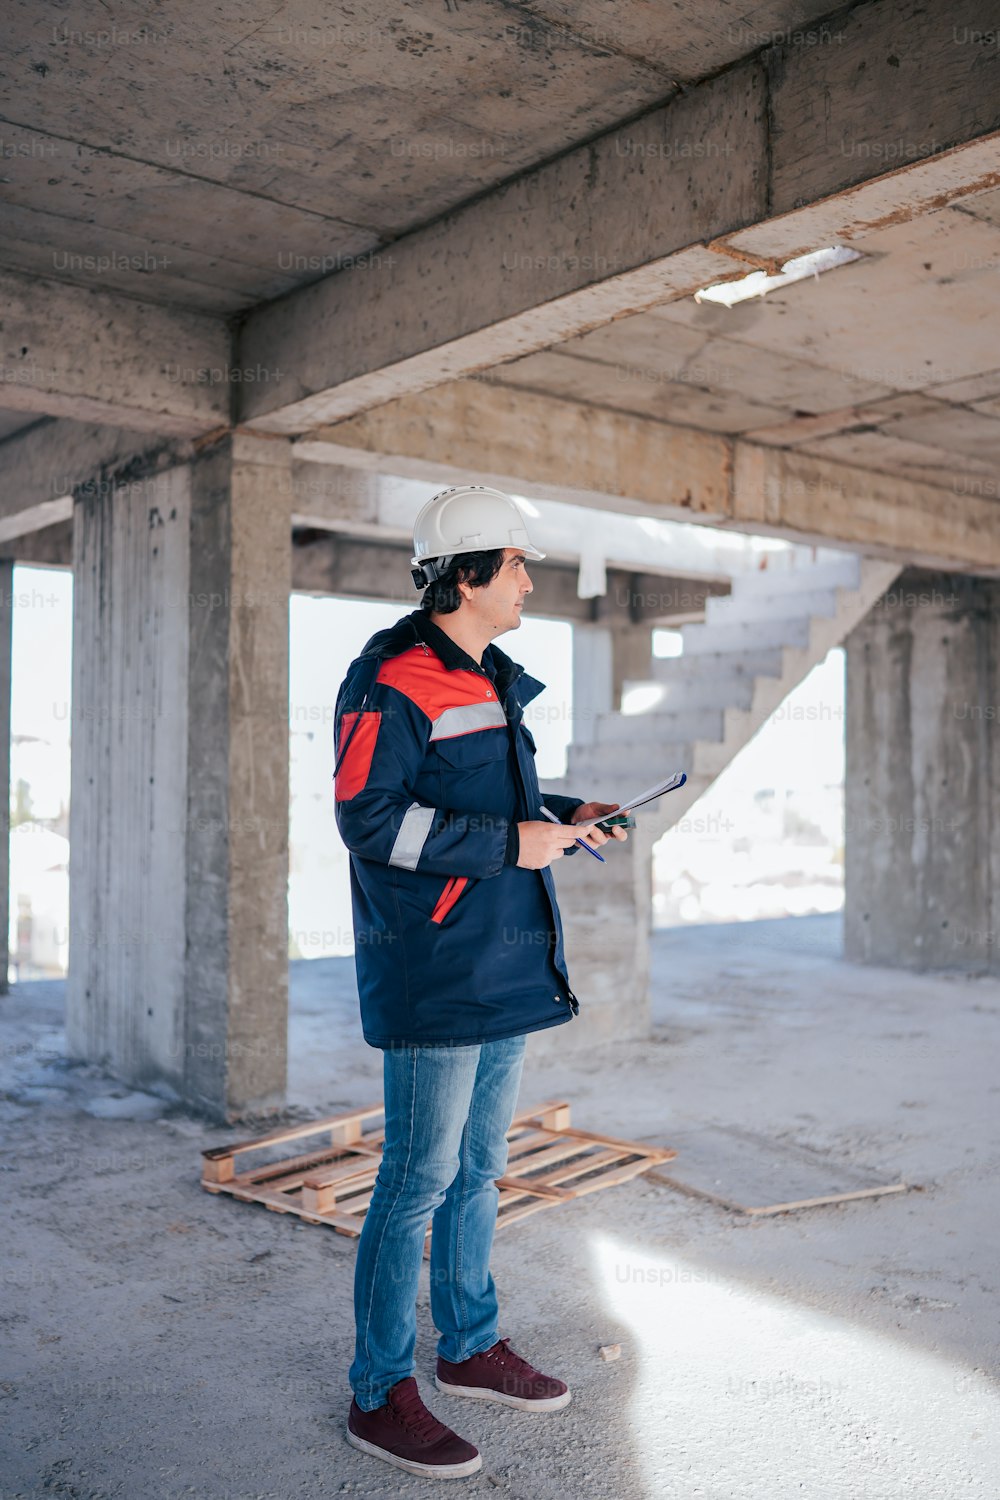 a woman wearing a hard hat standing in an unfinished building